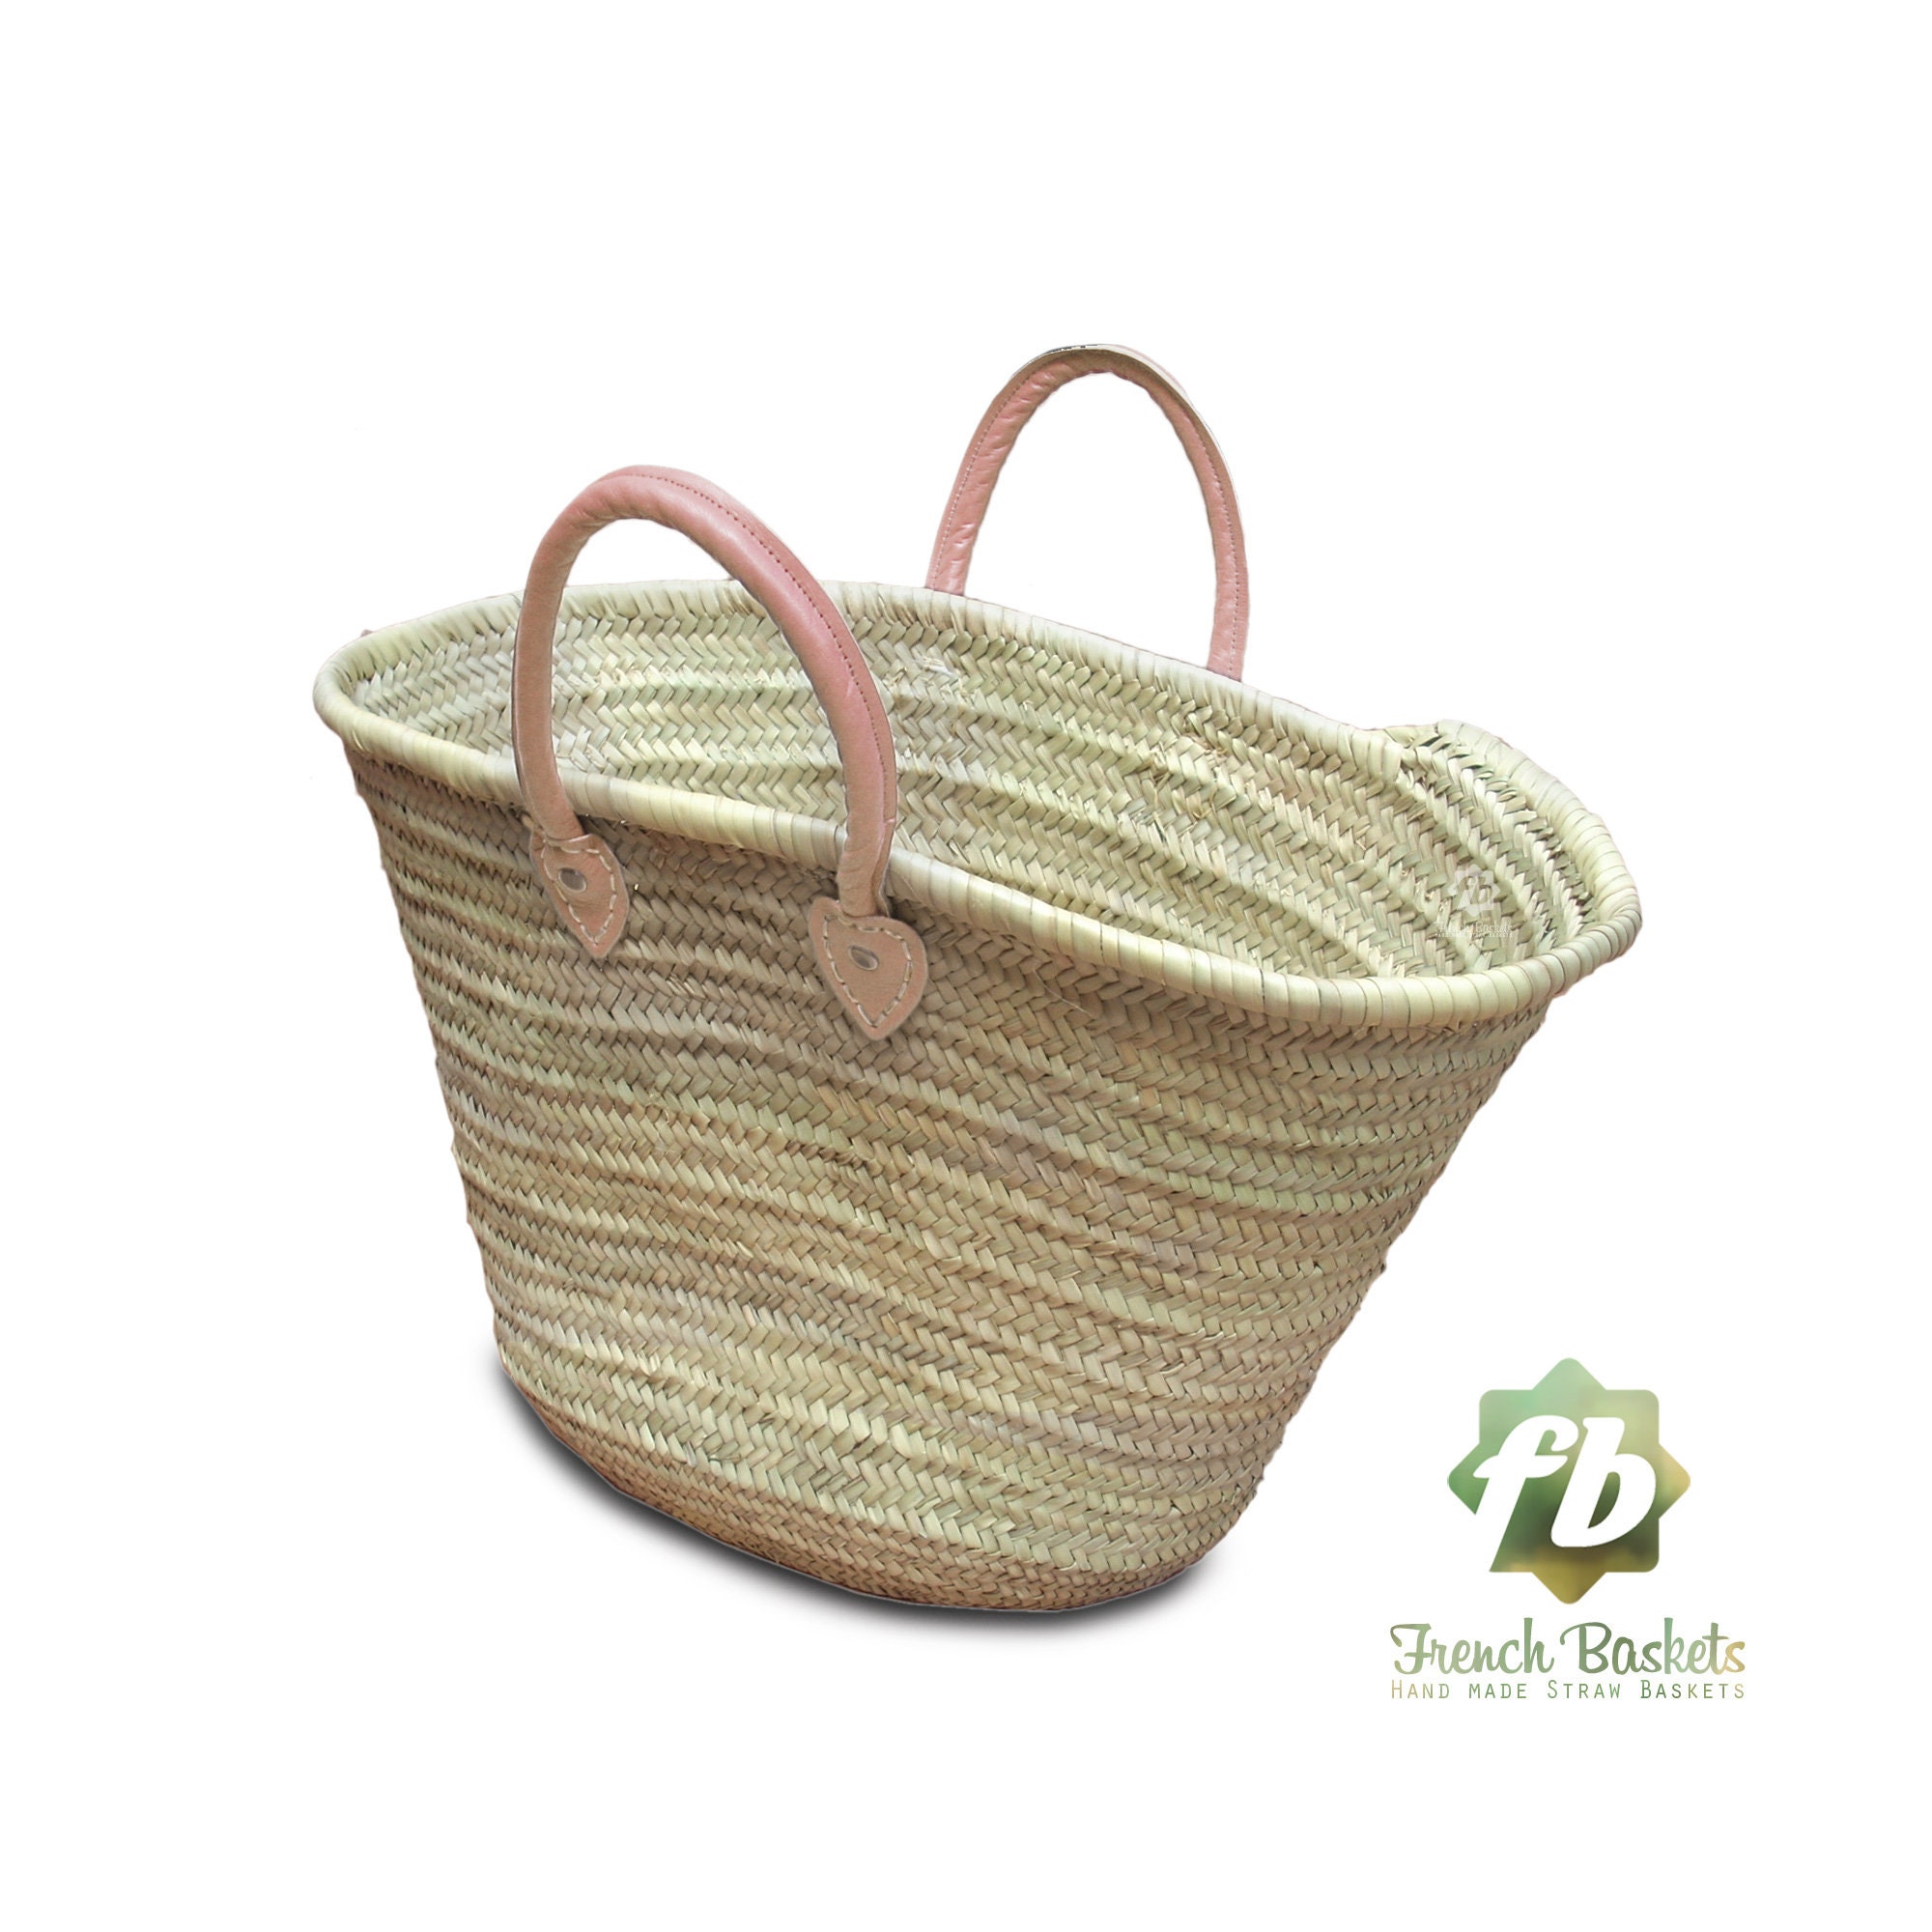 Best Straw Bag natural baskets with clasp belt | French Baskets